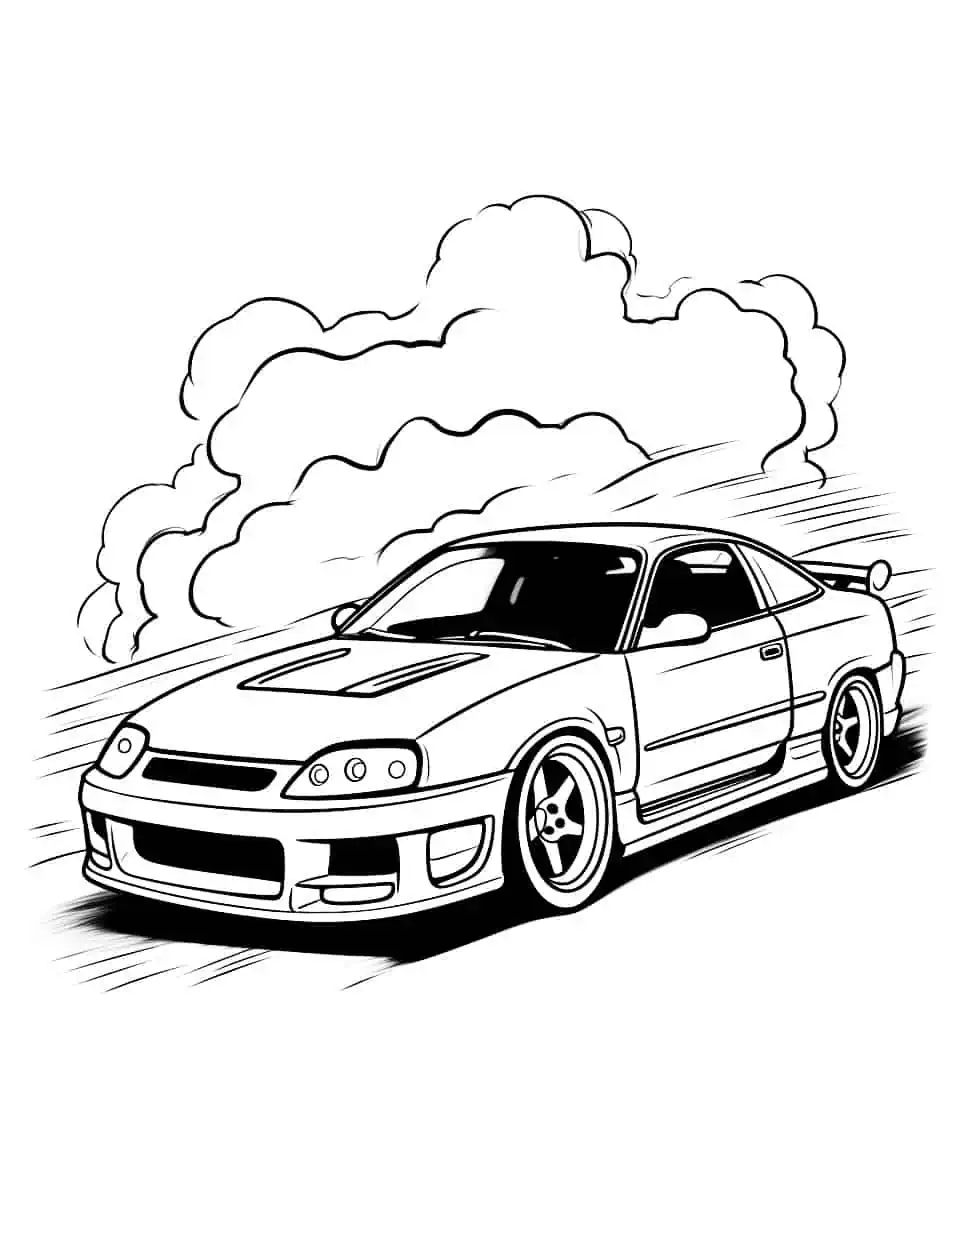 Sport Car Showdown Coloring Page - A cool sports car ready for a colorful makeover.